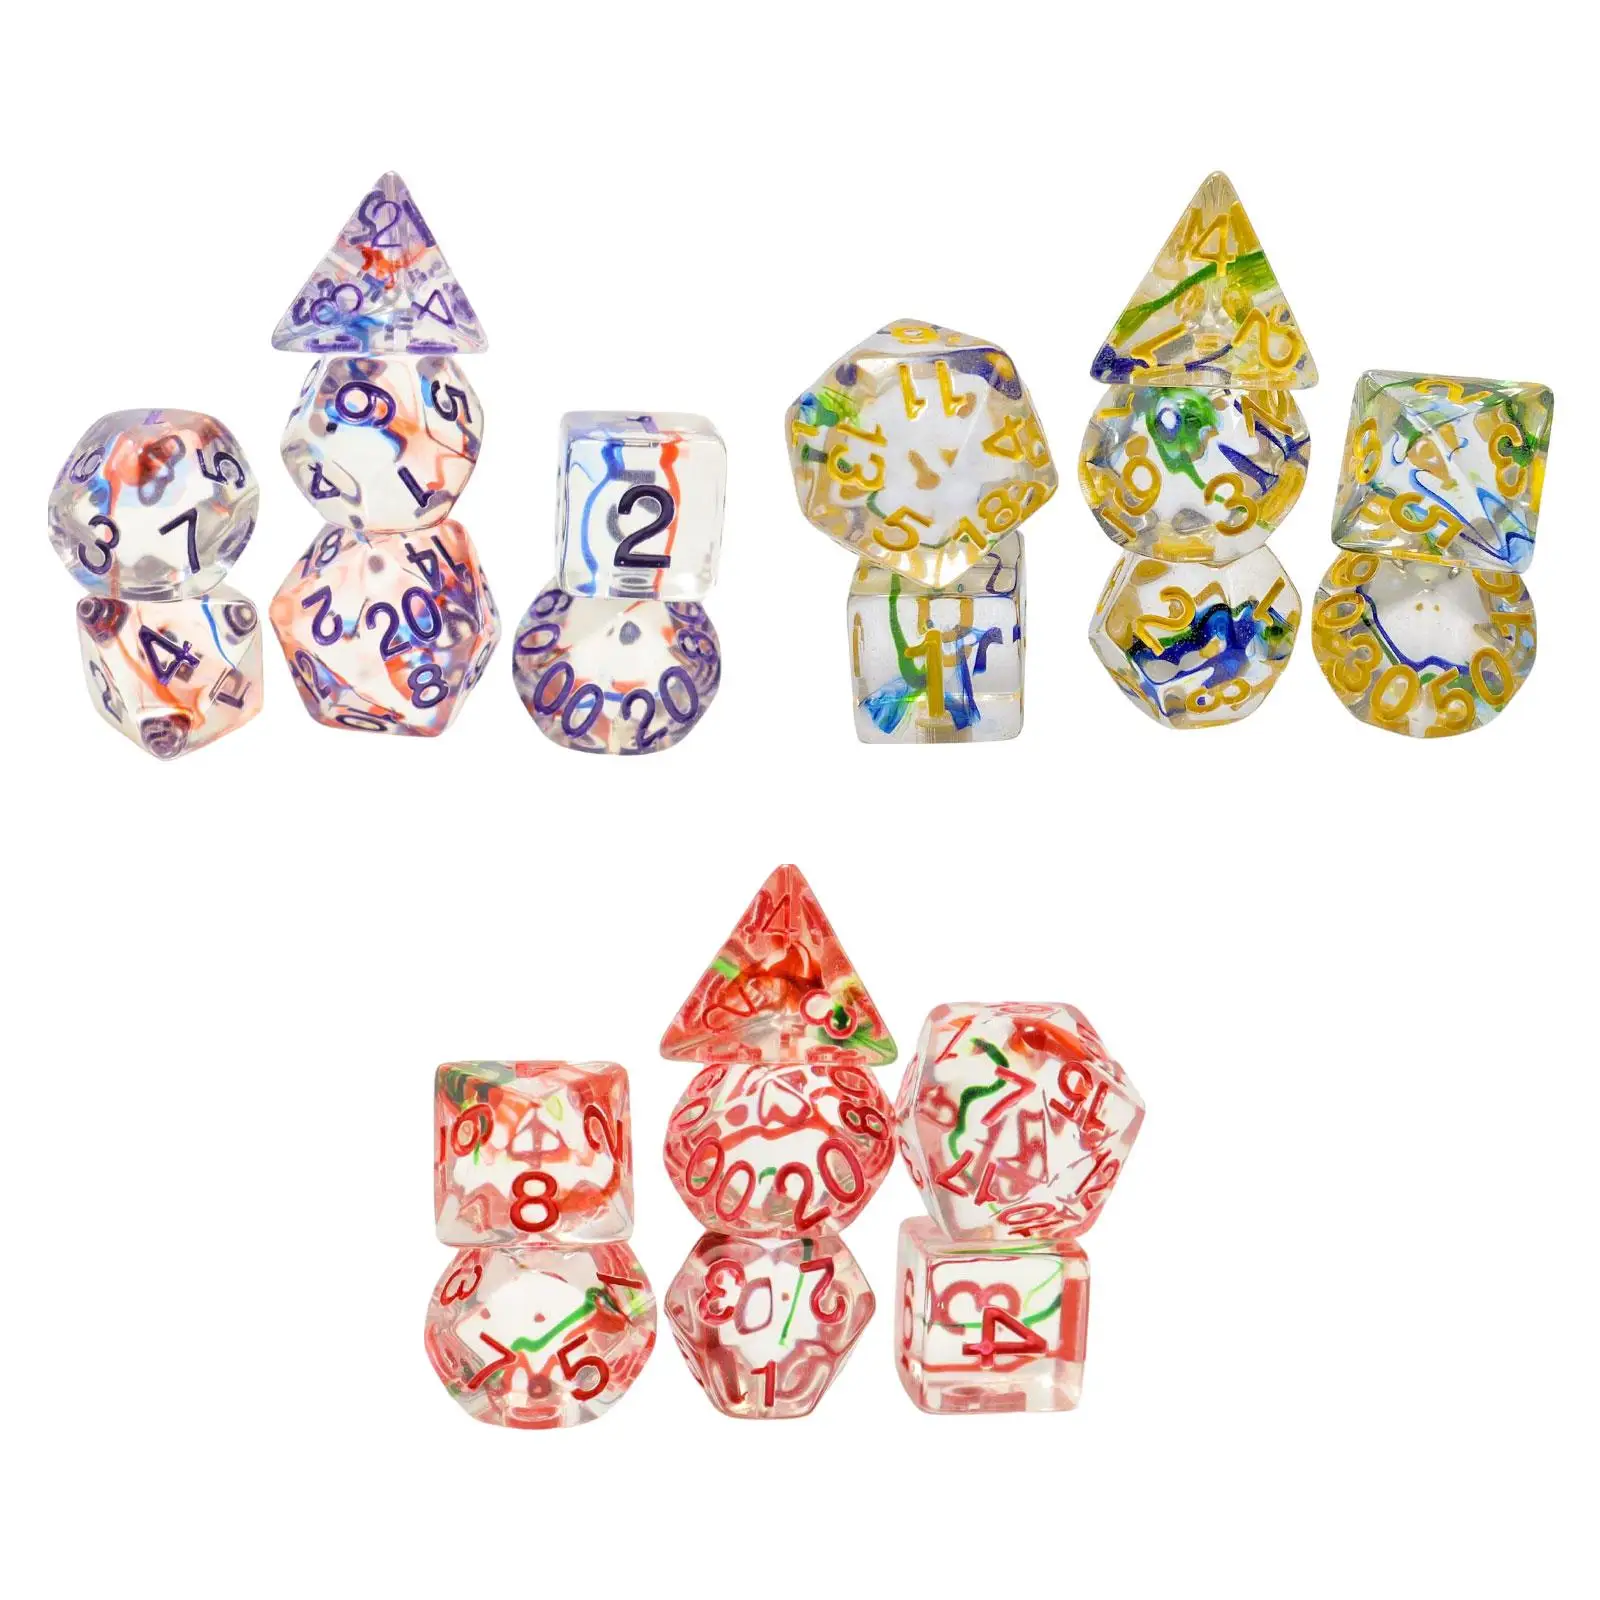 7x Polyhedral Dices Game, Dices Set, D20 D12 D10 D8 D6 D4 Party Game Dices, Multi Sided Game Dices for Card Game